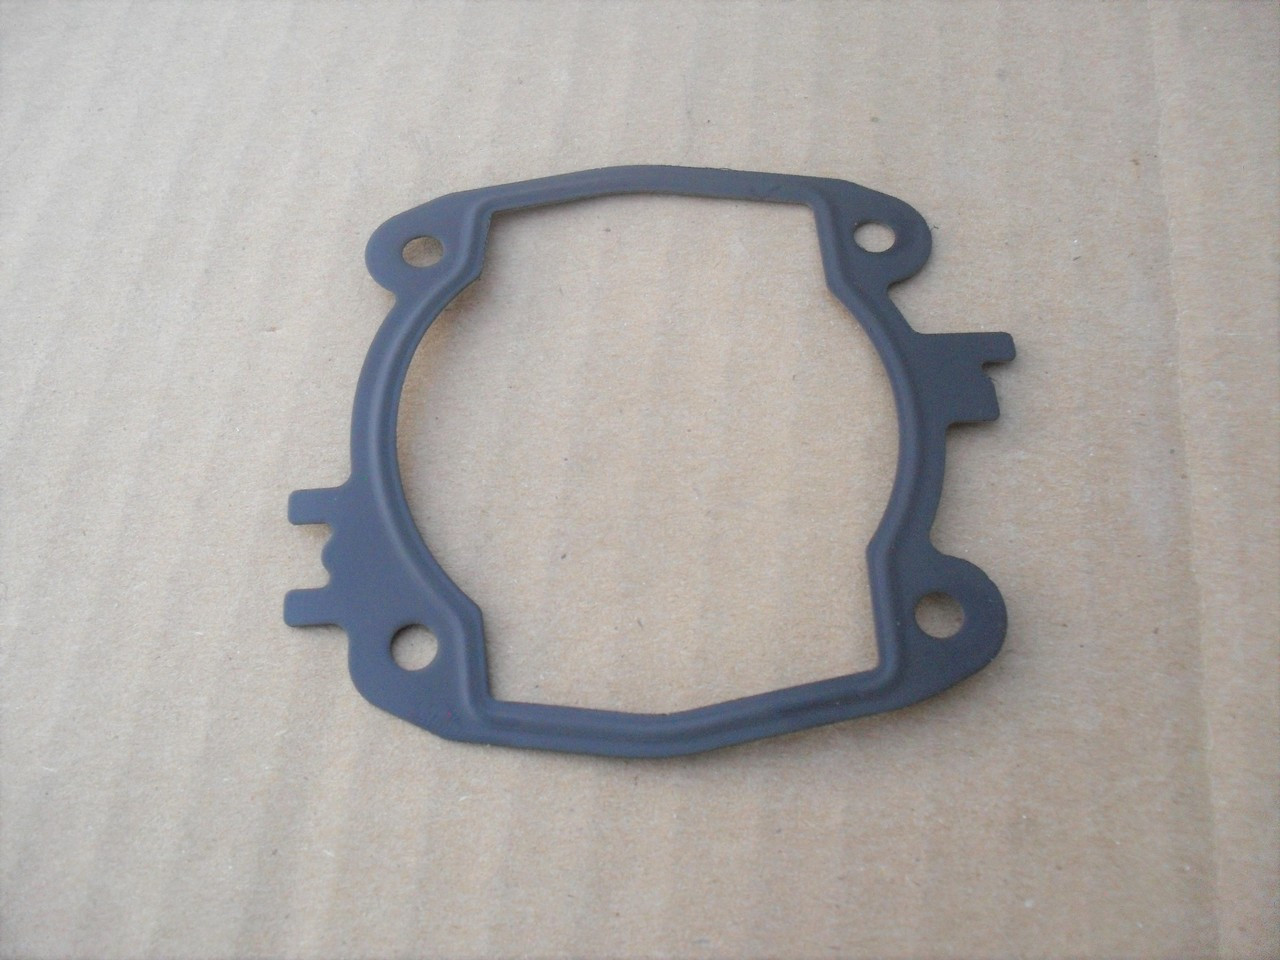 Cylinder Base Gasket for Stihl TS410 and TS420 Cutquik Saw 42380292300, 4238 029 2300